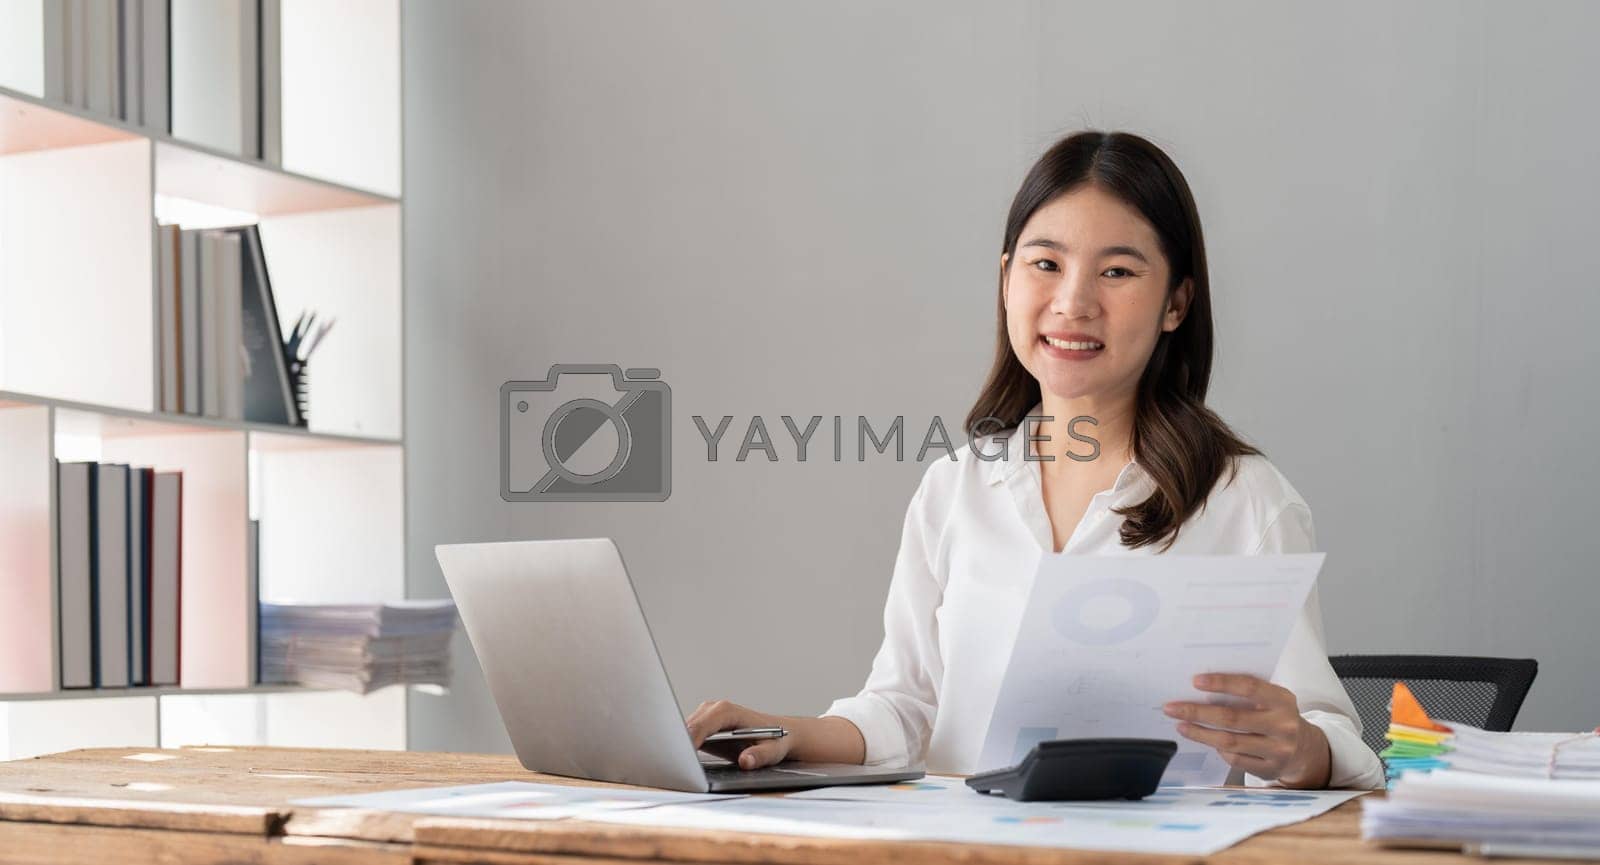 Royalty free image of business woman analyst sales management, taxes financial data documents or marketing report papers working in office using laptop. by nateemee